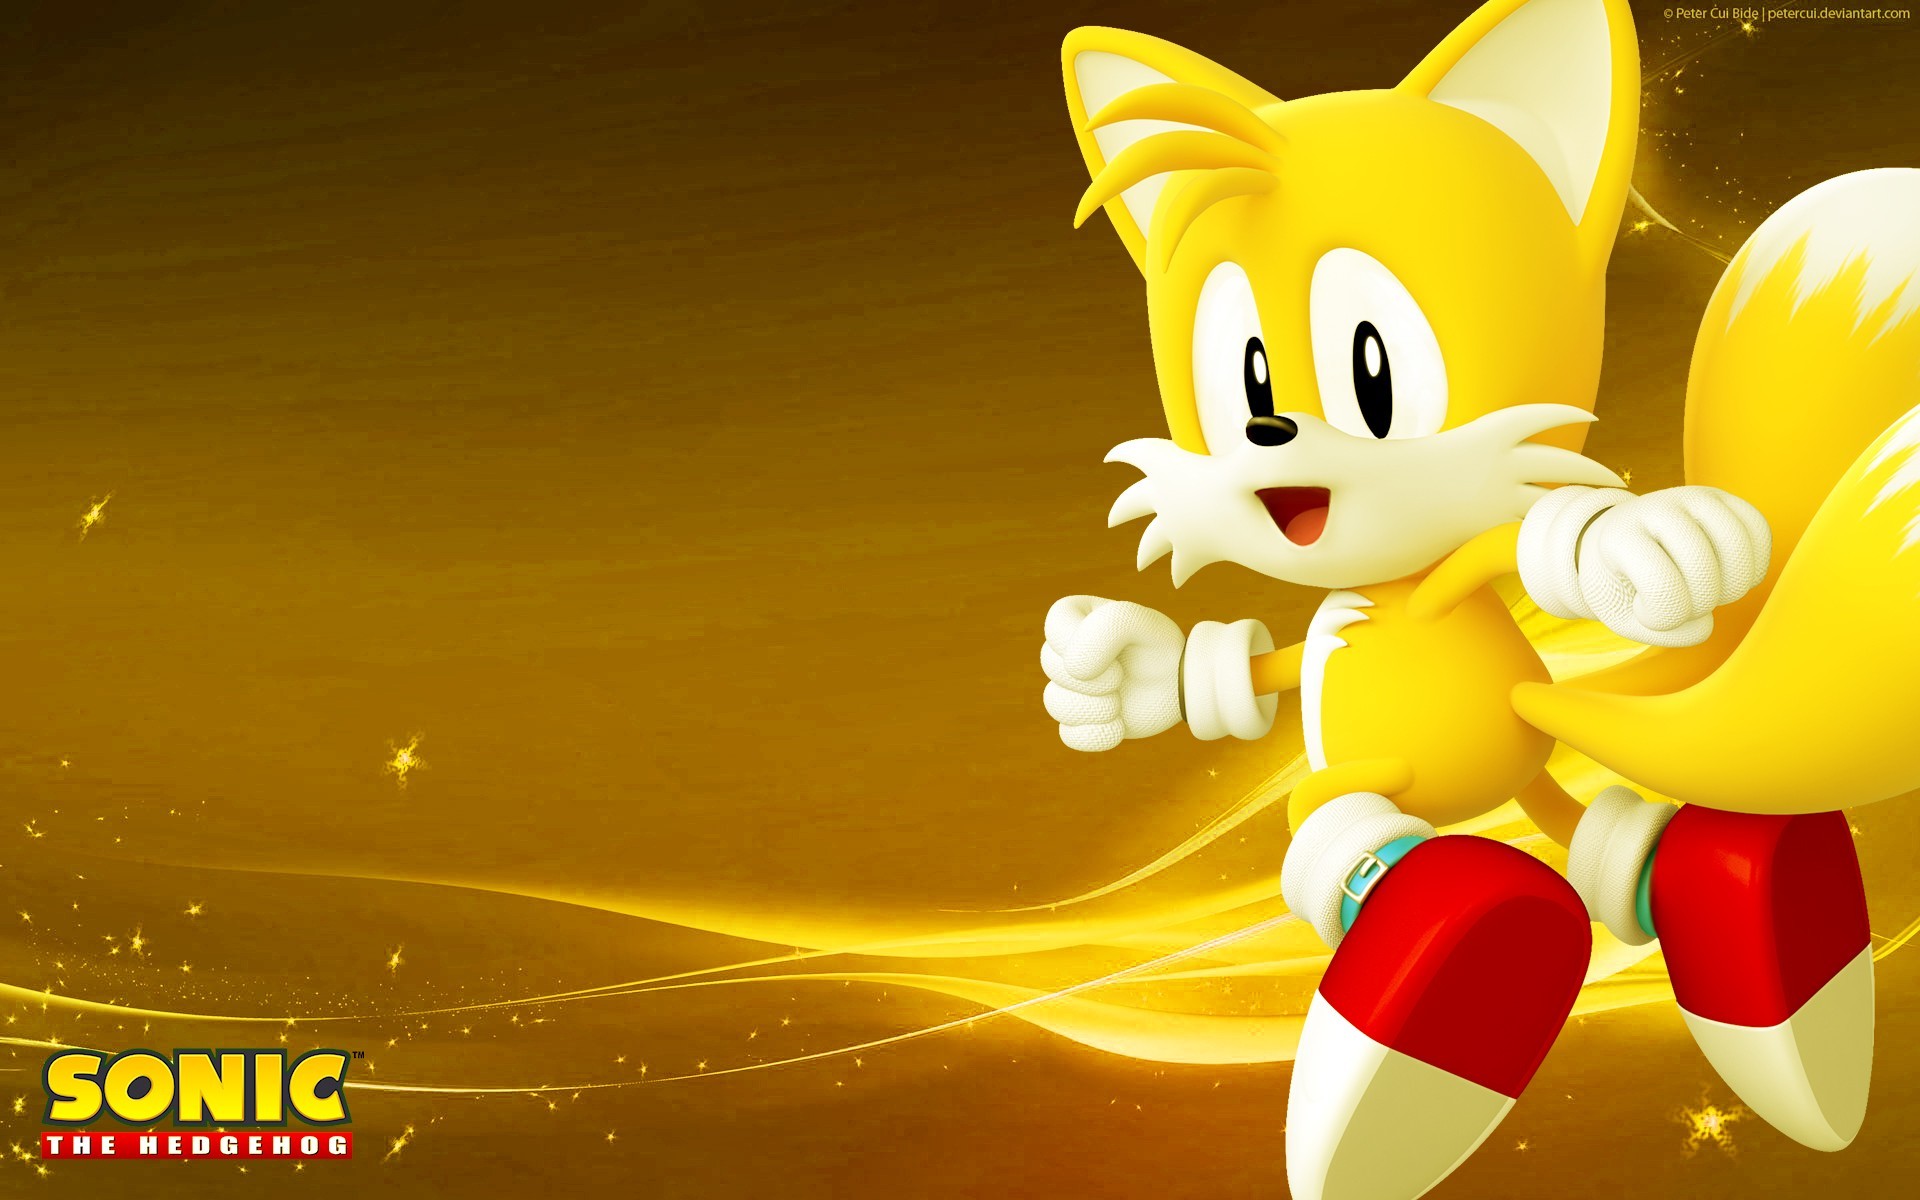 Video Game – Sonic the Hedgehog Miles Tails Prower Wallpaper